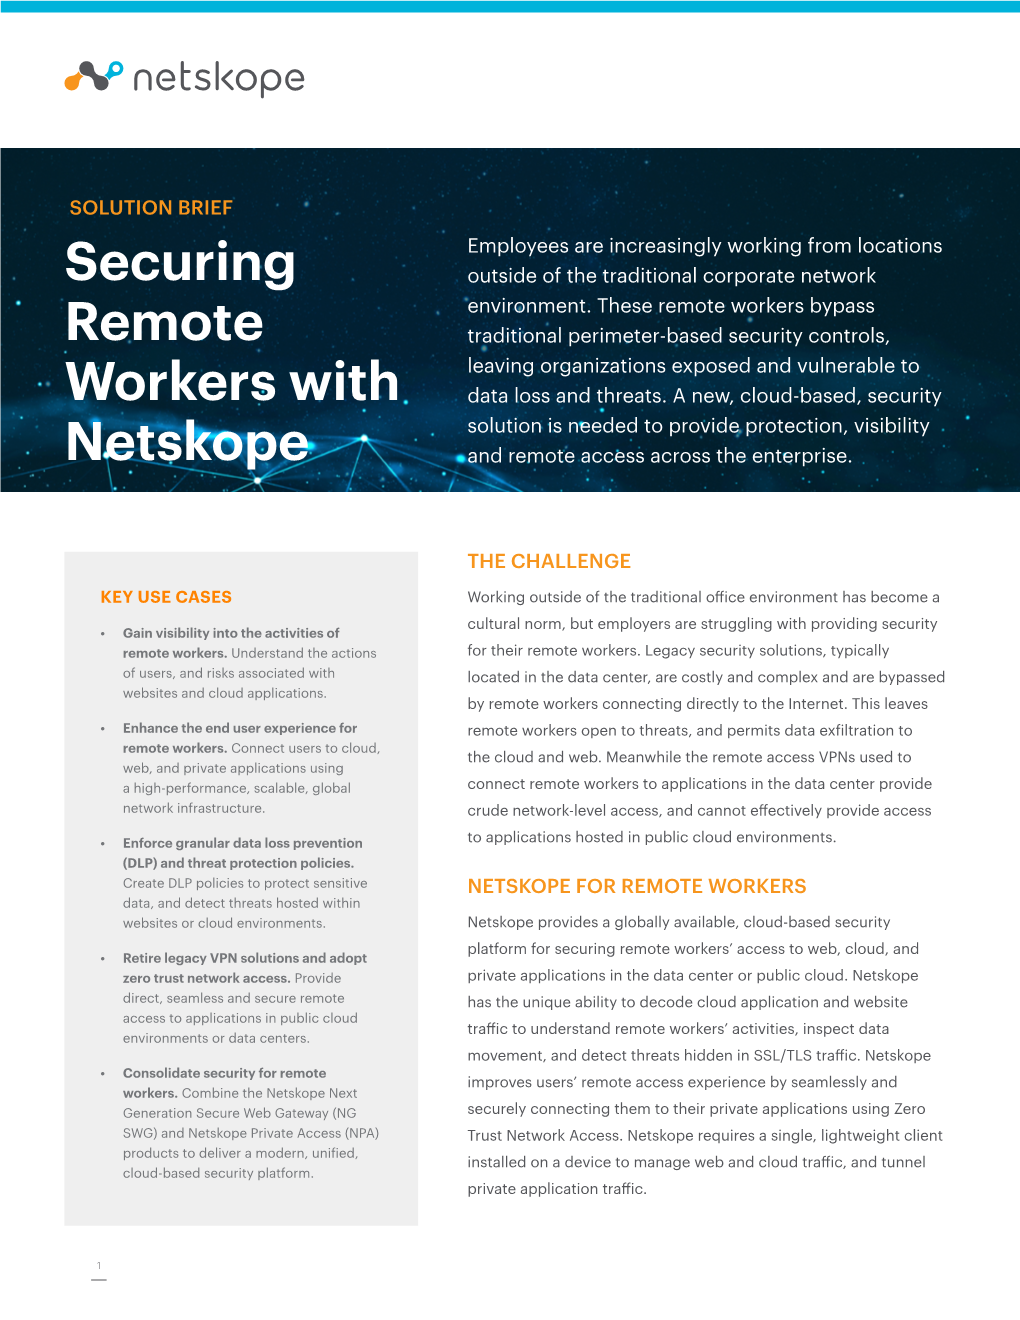 Securing Remote Workers with Netskope